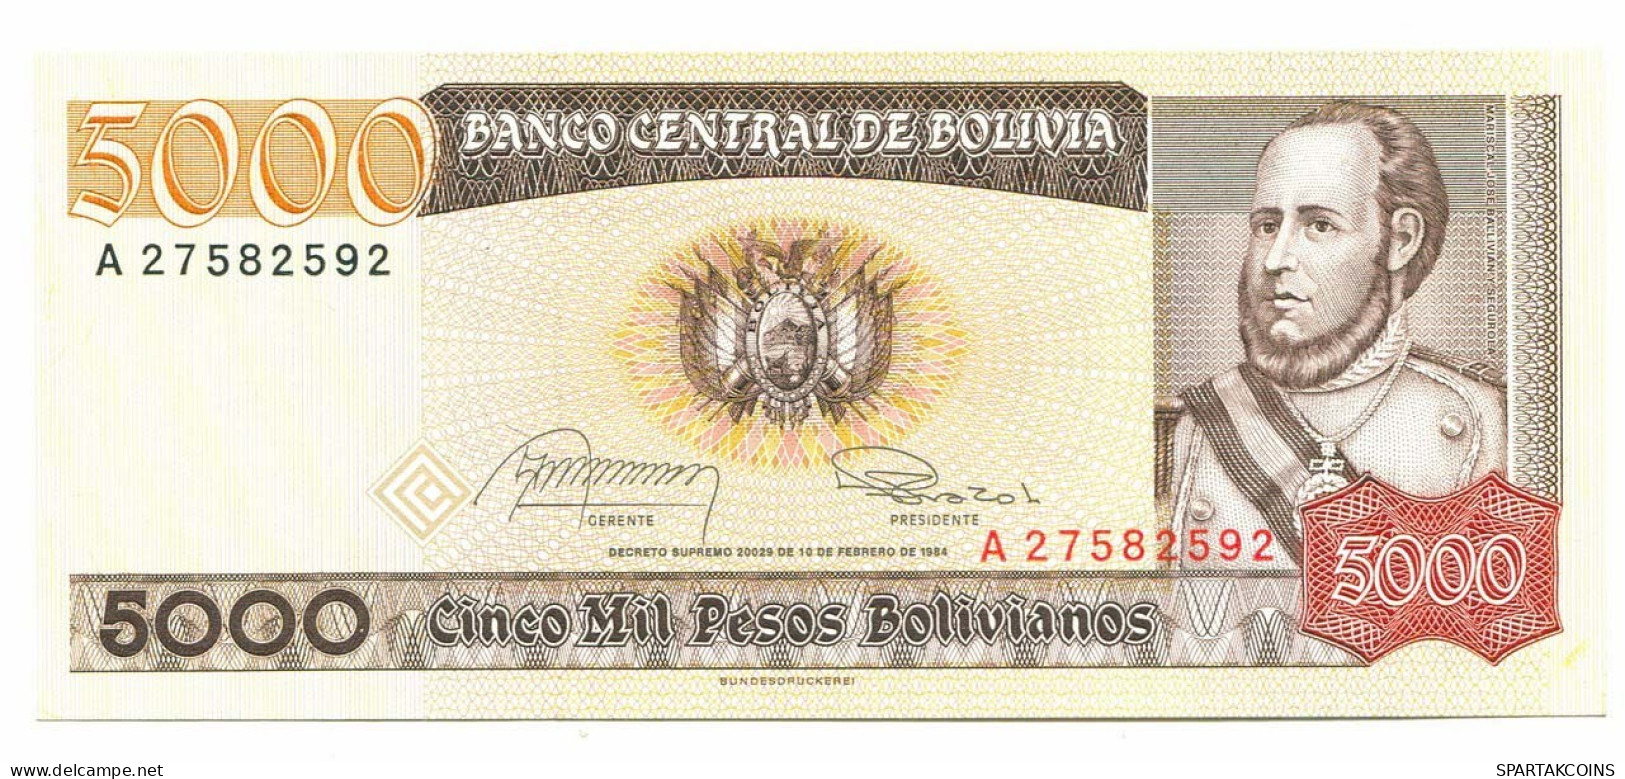 BOLIVIA 5000 PESOS BOLIVIANOS 1984 AUNC Paper Money Banknote #P10810.4 - [11] Local Banknote Issues